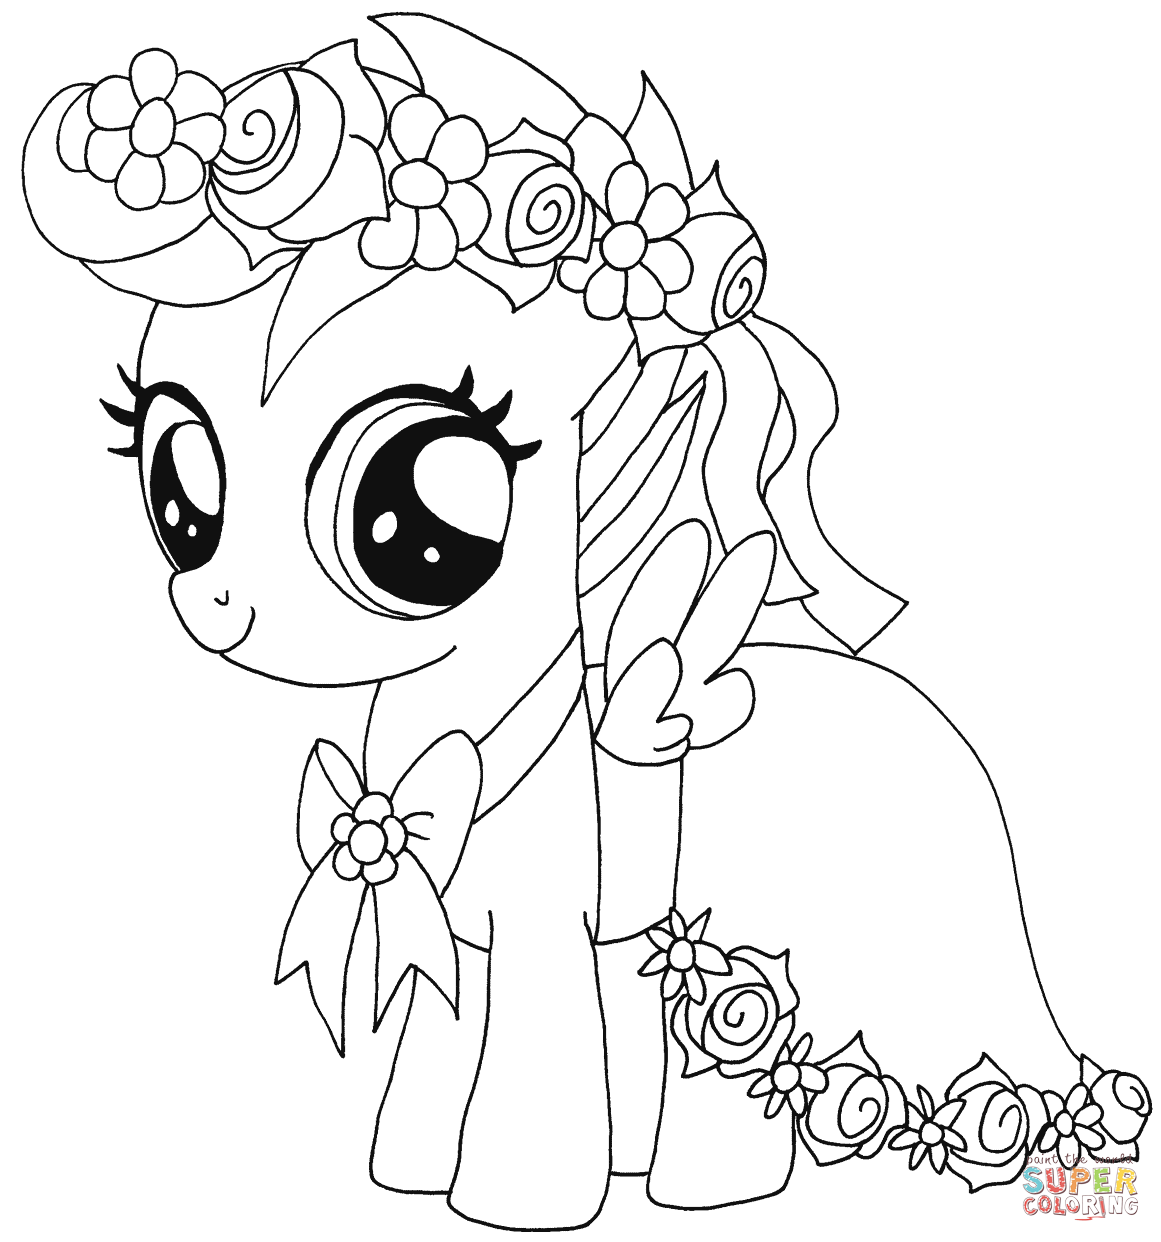 My Little Pony Coloring Pages   Free Coloring Pages   Coloring Home